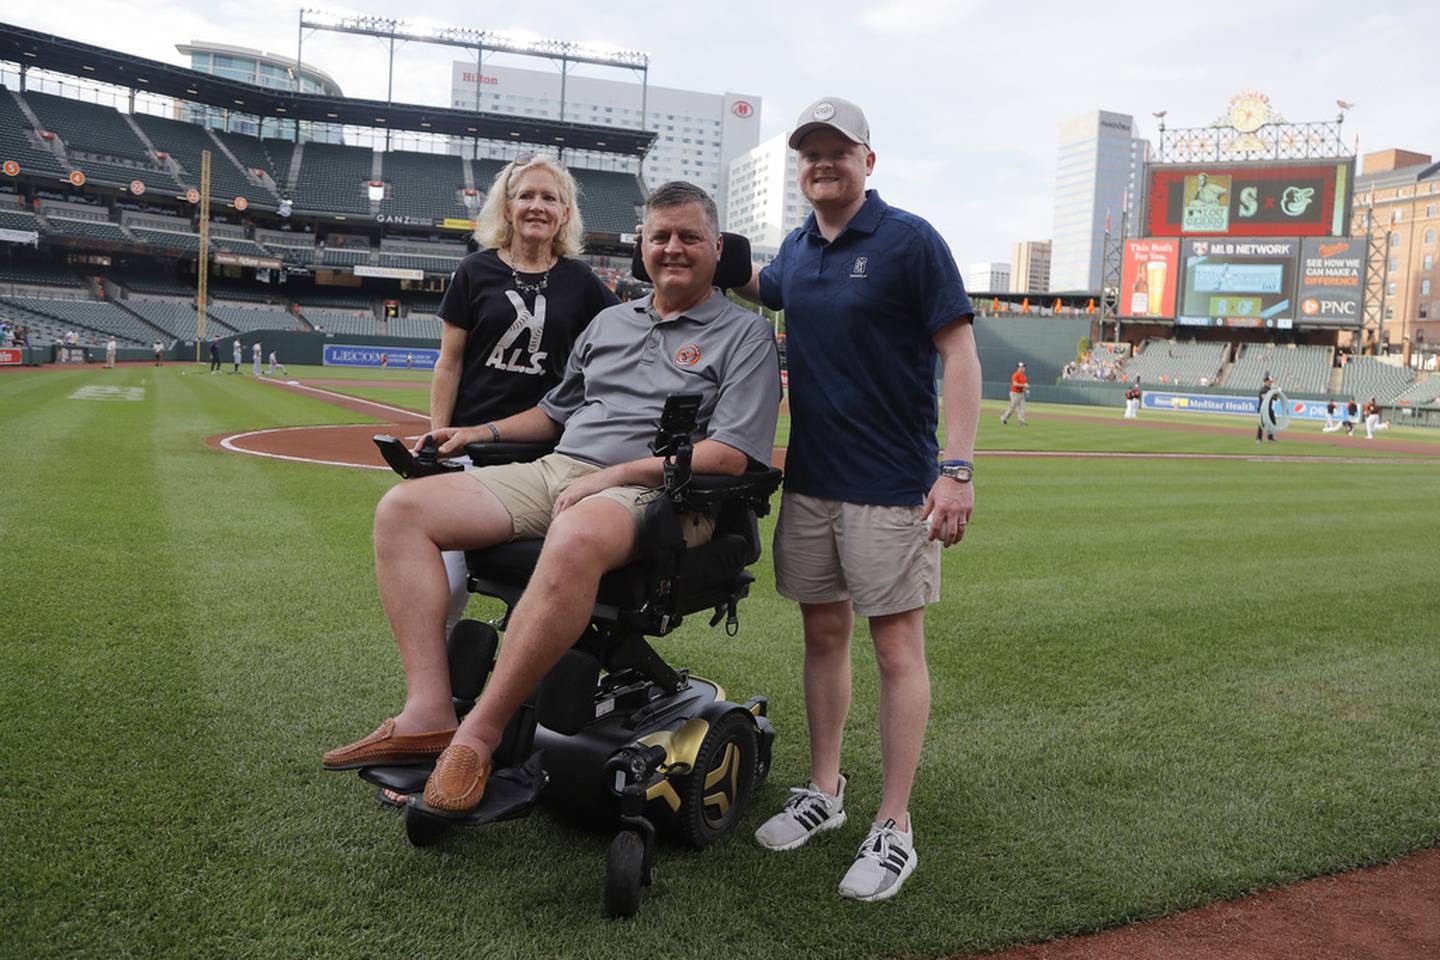 FILE - Former Baltimore Orioles pitcher Jim Poole, center, poses for a photo with his wife, Kim Poole, left, and their son Hayden Poole, prior to a baseball game between the Orioles and the Seattle Mariners, Thursday, June 2, 2022, in Baltimore. Poole, who pitched in the big leagues for 11 seasons and surrendered the deciding homer to Atlanta's David Justice in the 1995 World Series, died of complications from ALS, Friday, Oct. 6, 2023. He was 57.